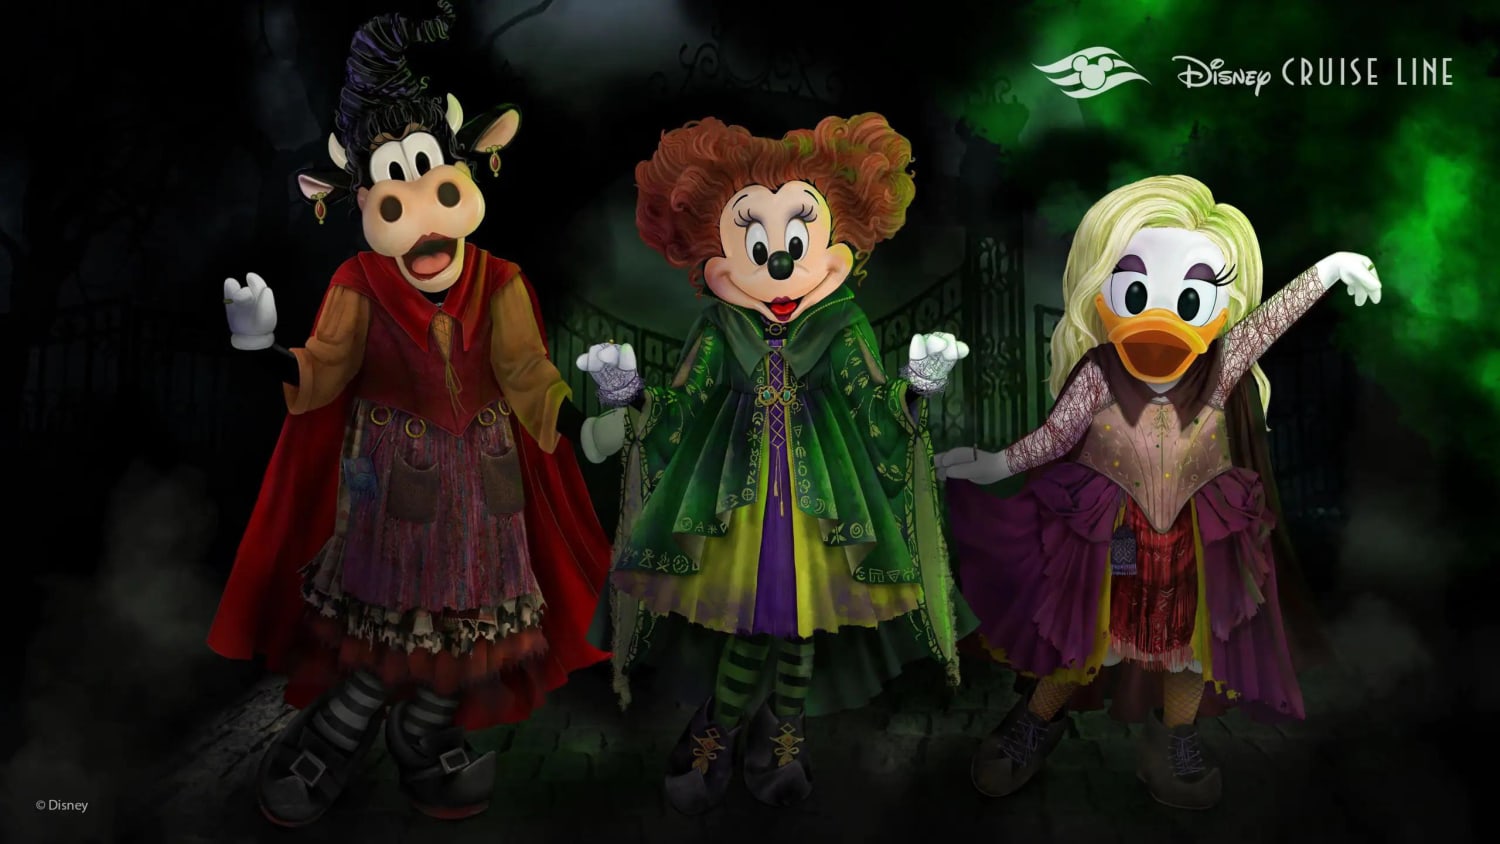 Minnie Mouse, Daisy Duck and Clarabelle Cow will be dressed as the Sanderson Sisters for Disney Cruise Line’s Halloween on the High Seas 🎃